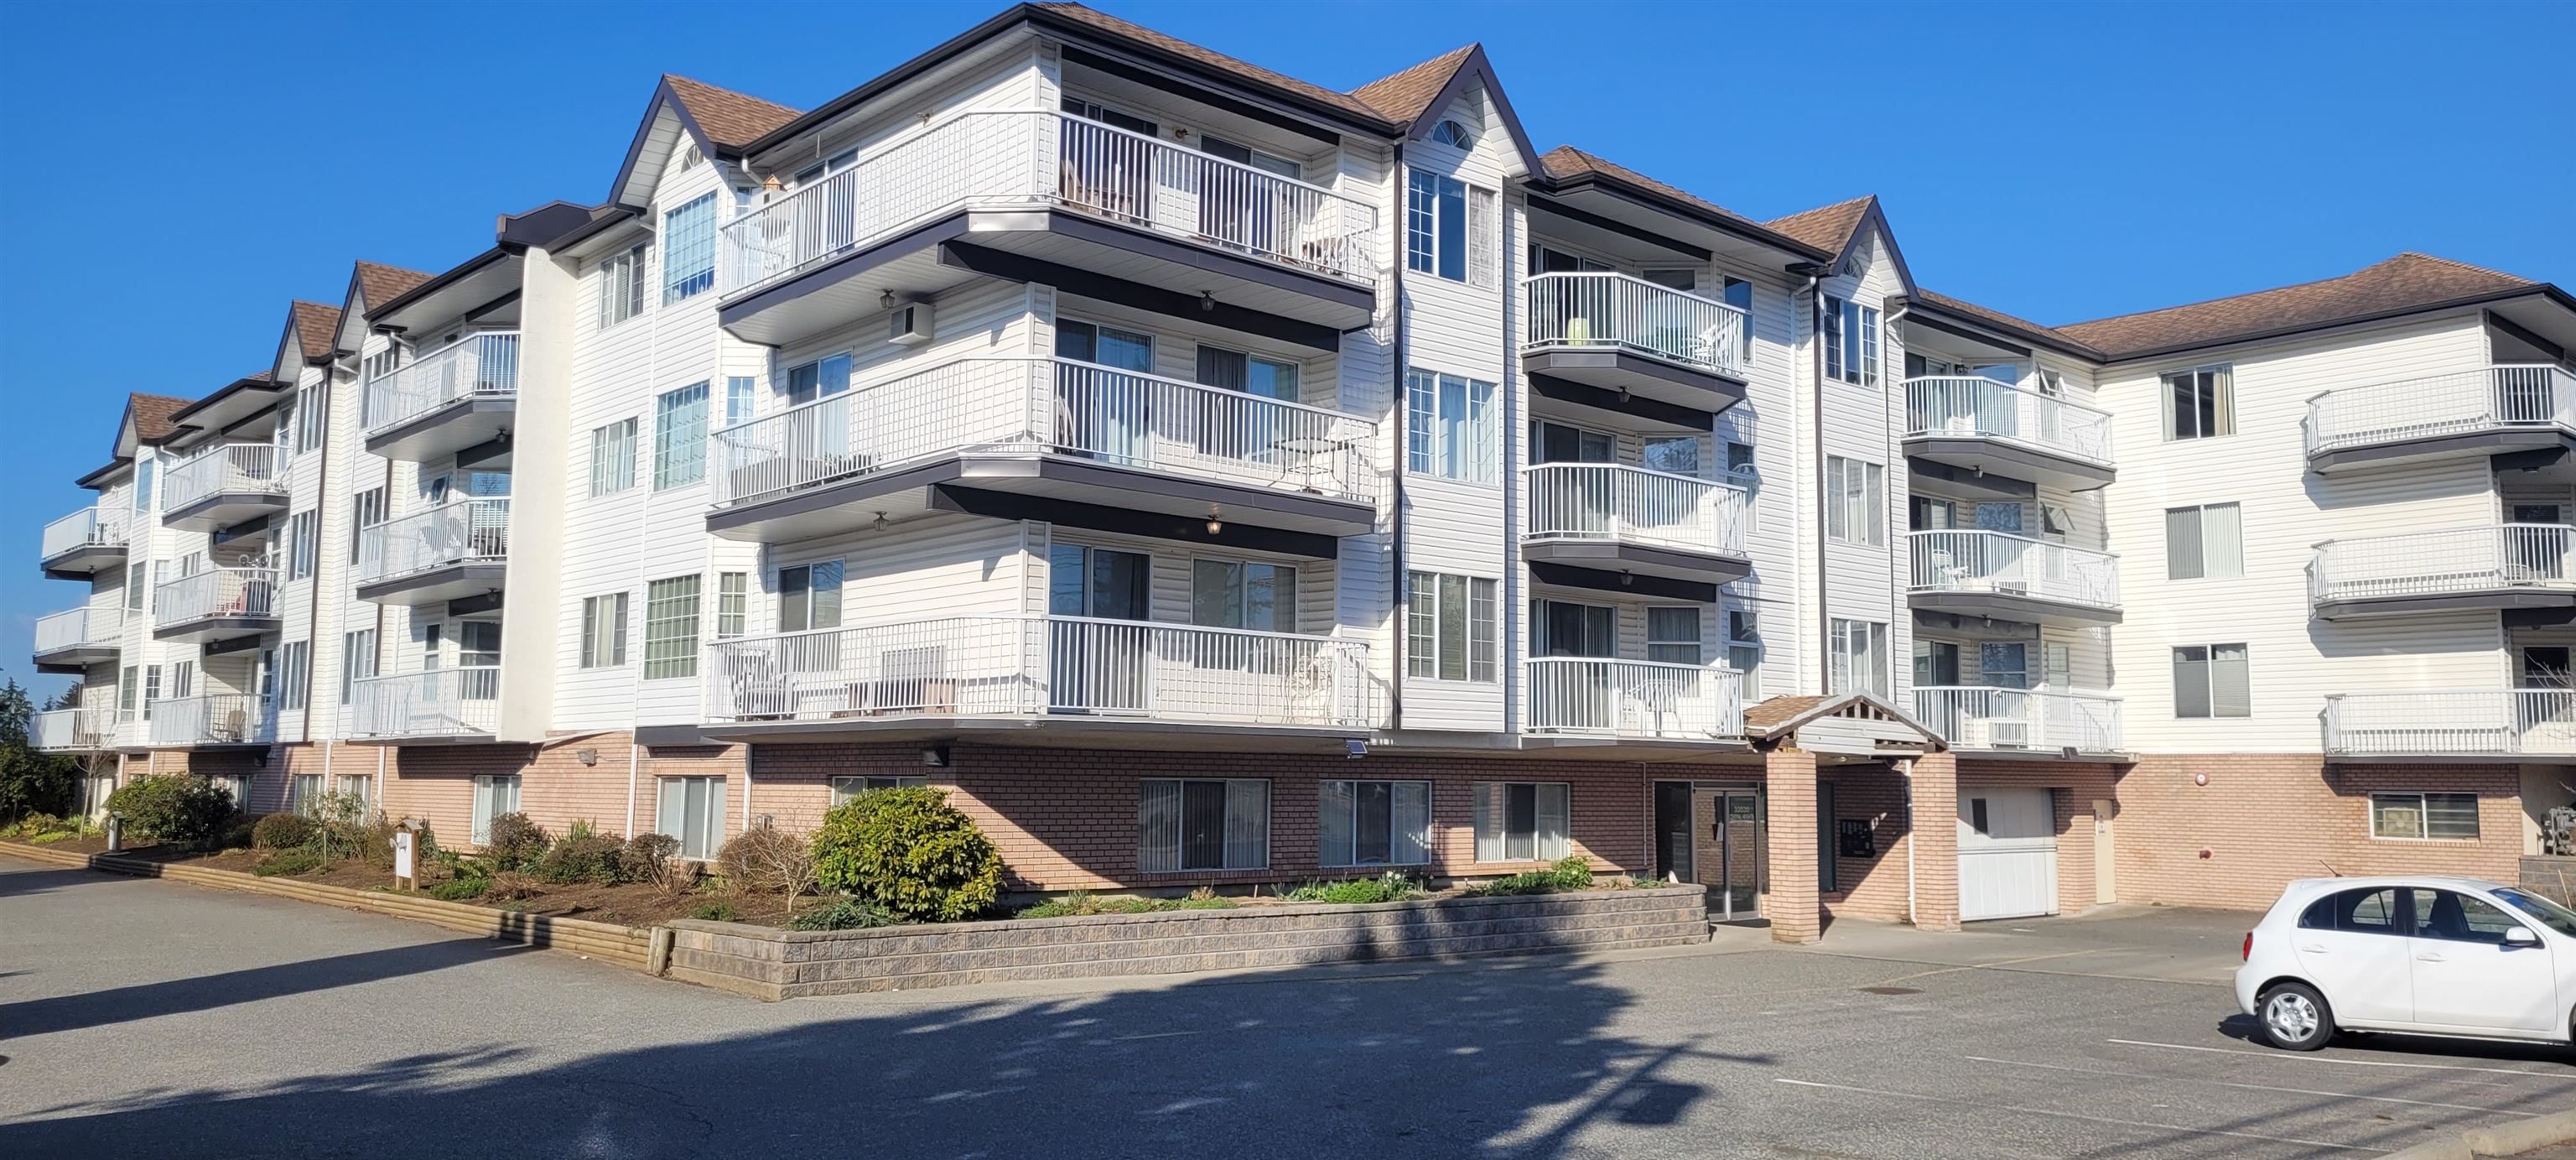 New property listed in Poplar, Abbotsford